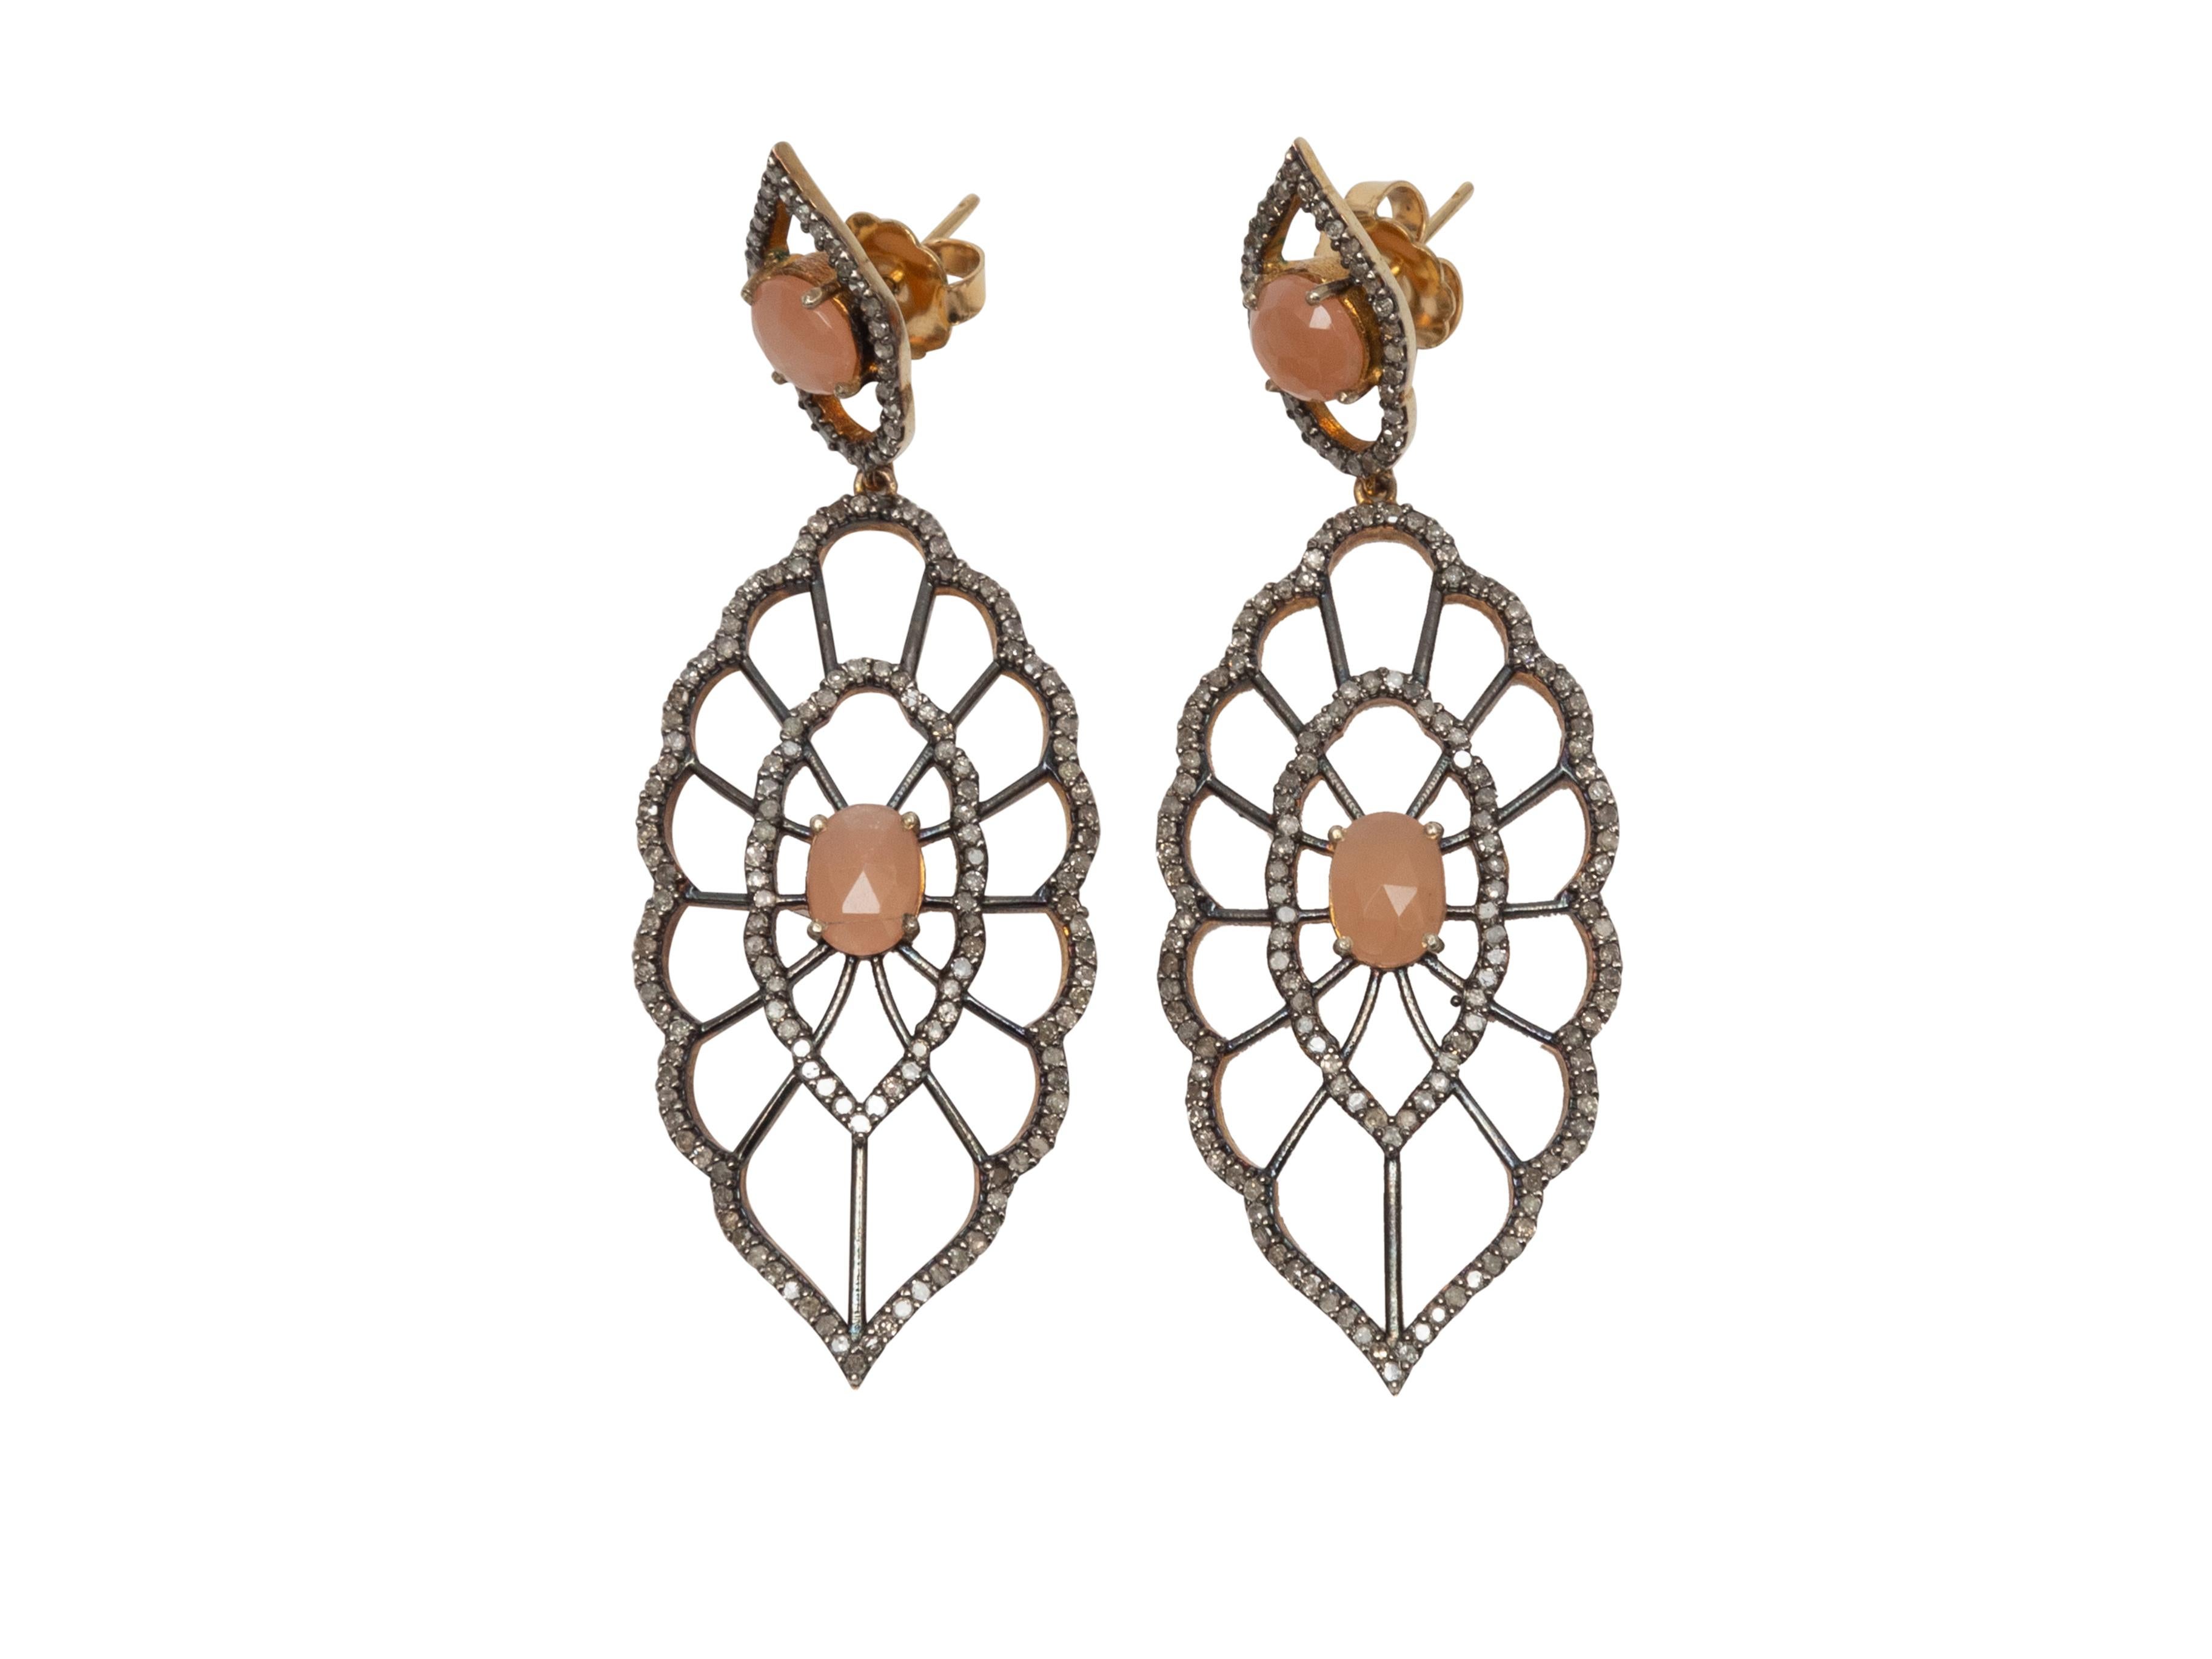 Product Details: Coral gemstone and pave diamond pierced dangly earrings by Jennifer Miller. 1